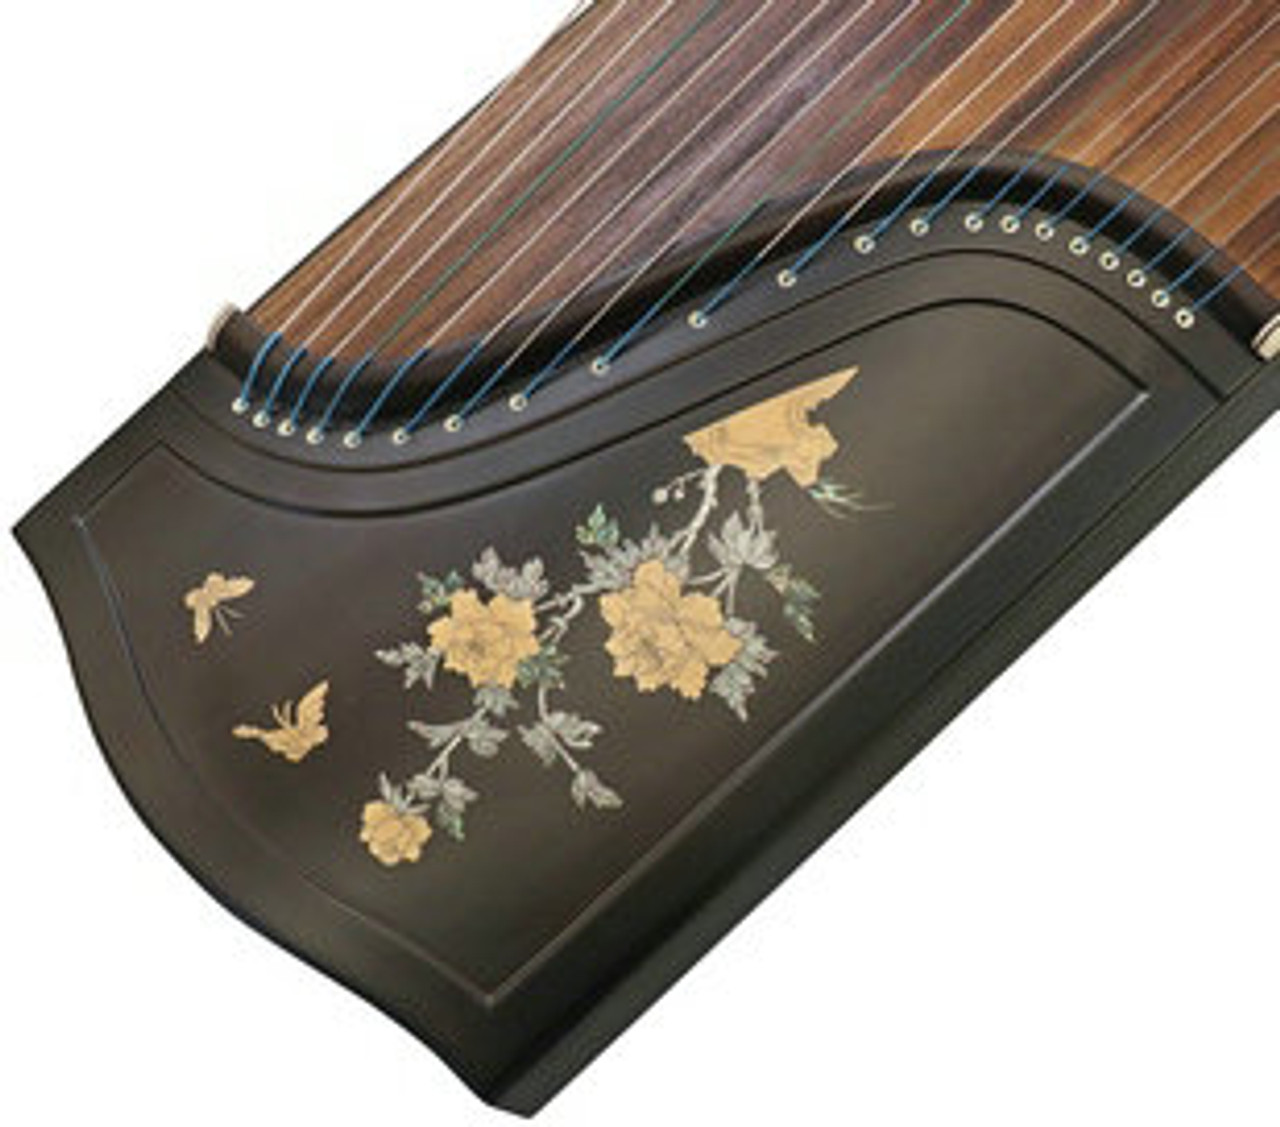 Concert Grade Peony Shell Carved Guzheng Instrument Chinese Zither Koto